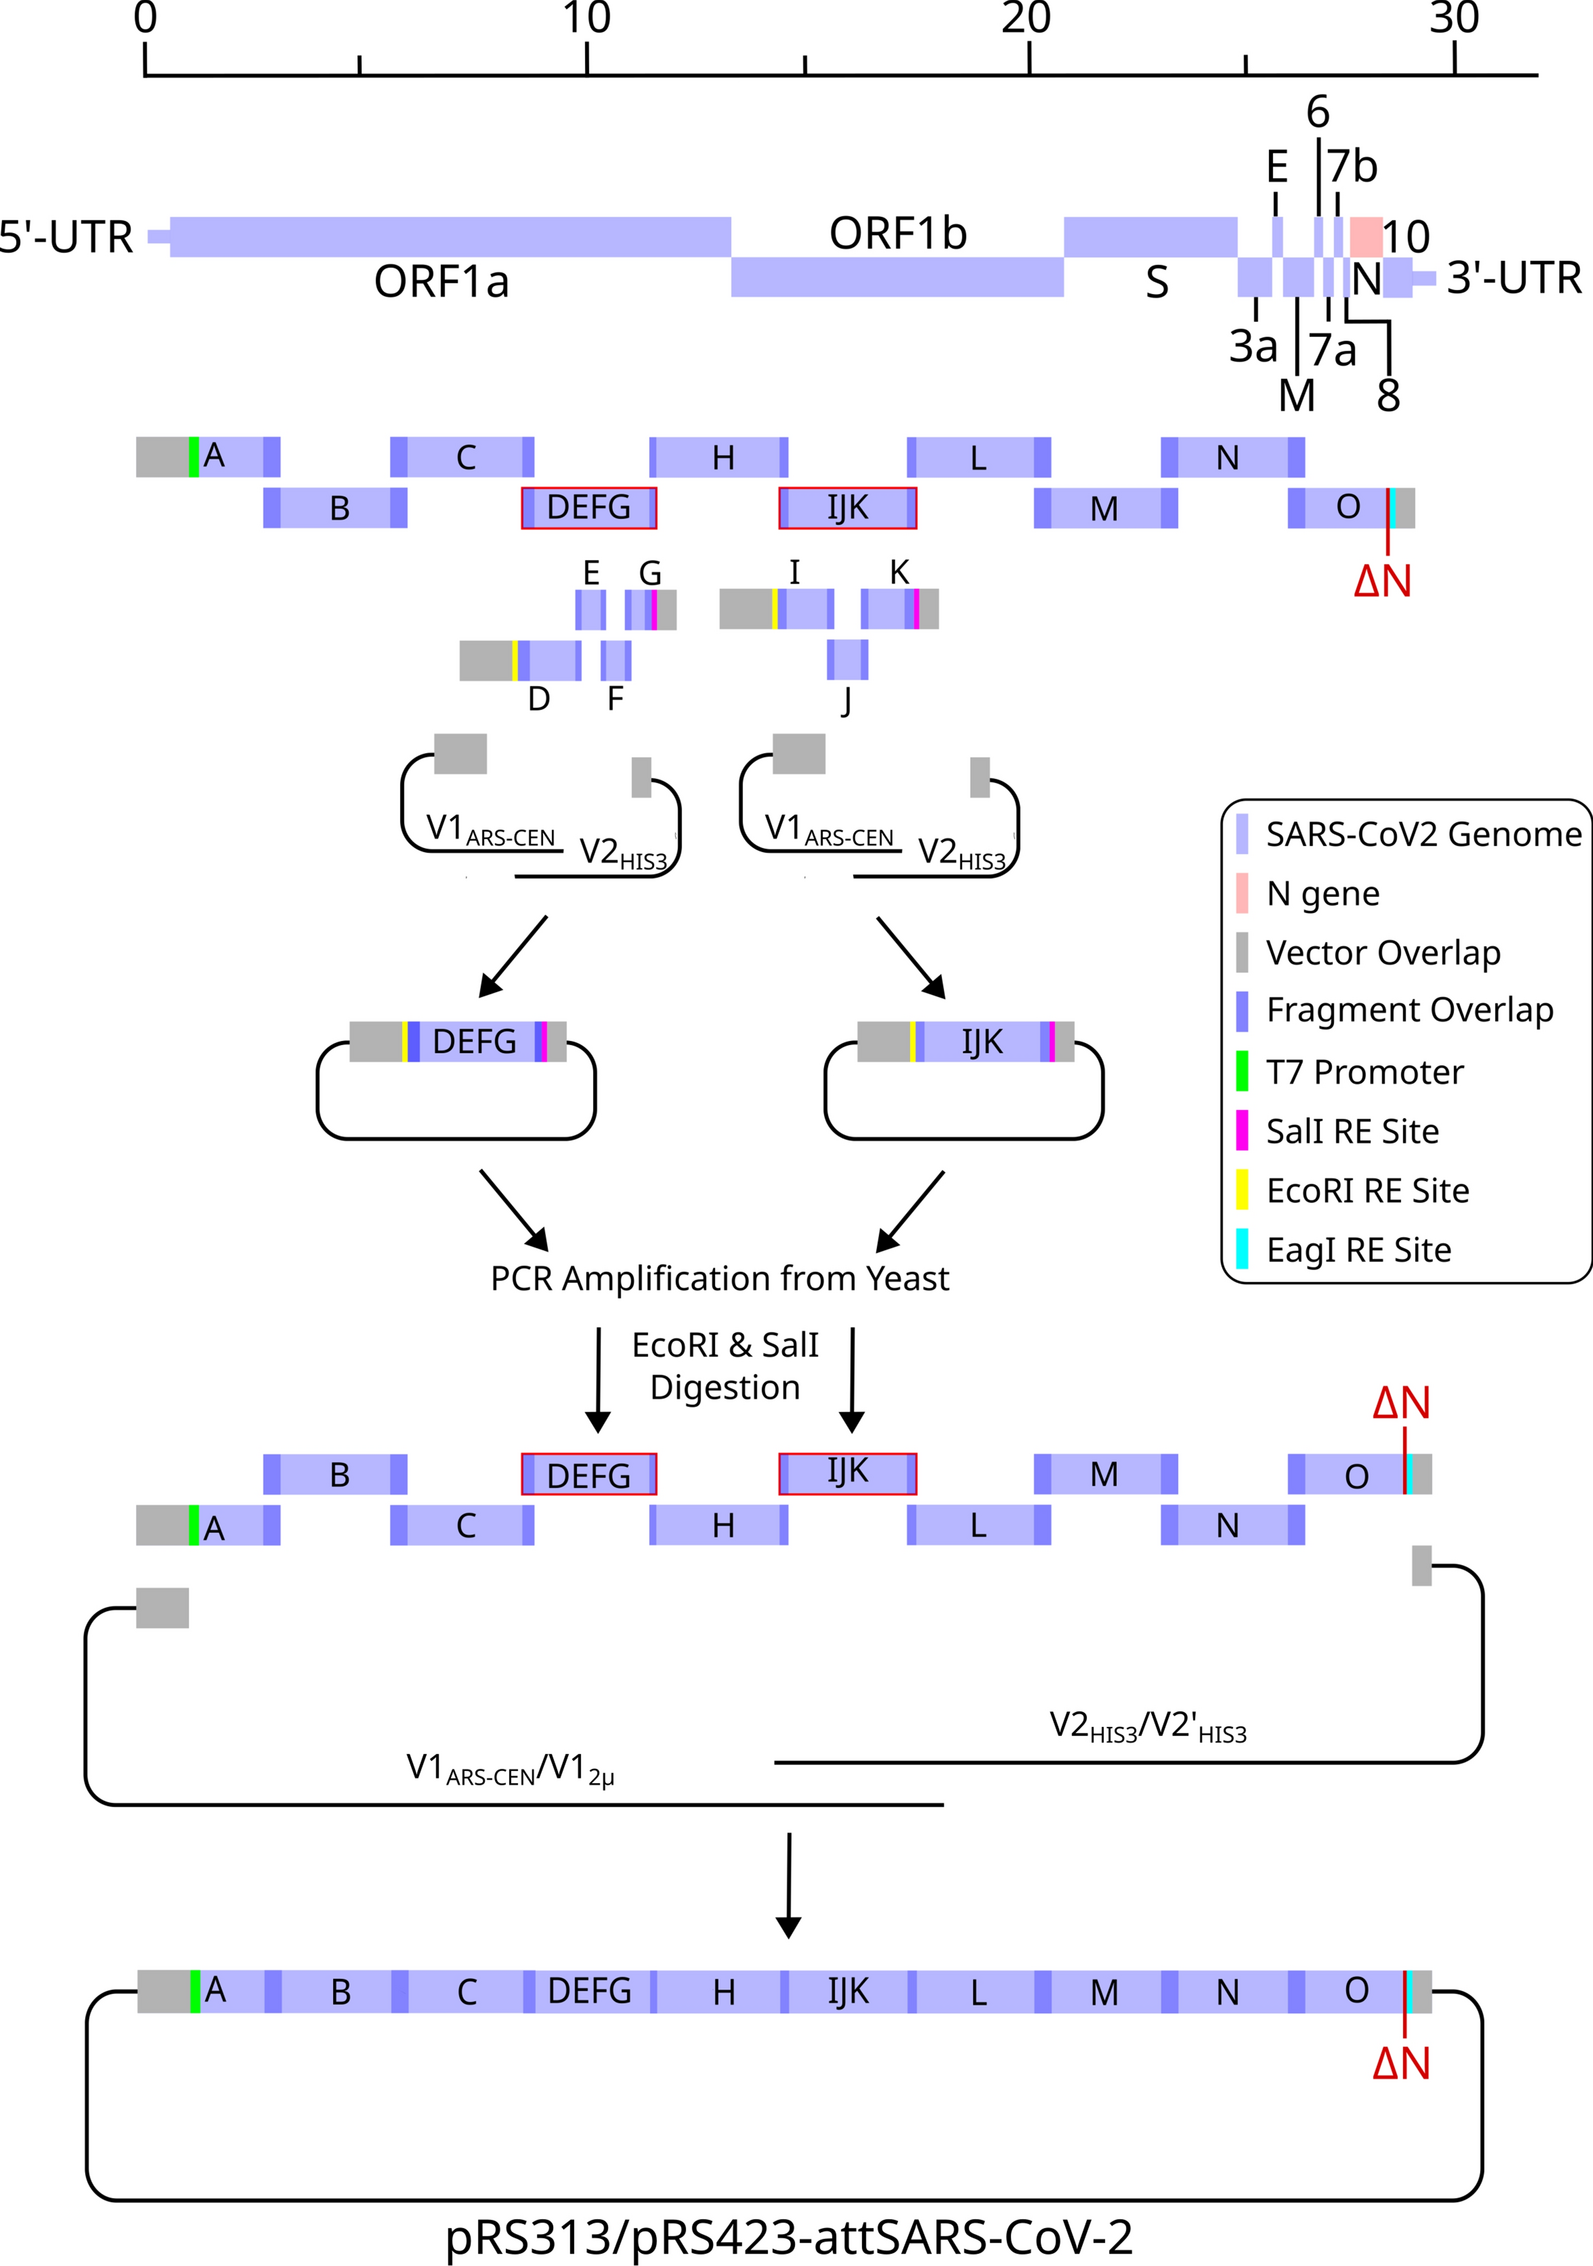 Efficient assembly of a synthetic attenuated SARS-CoV-2 genome in Saccharomyces cerevisiae using multi-copy yeast vectors